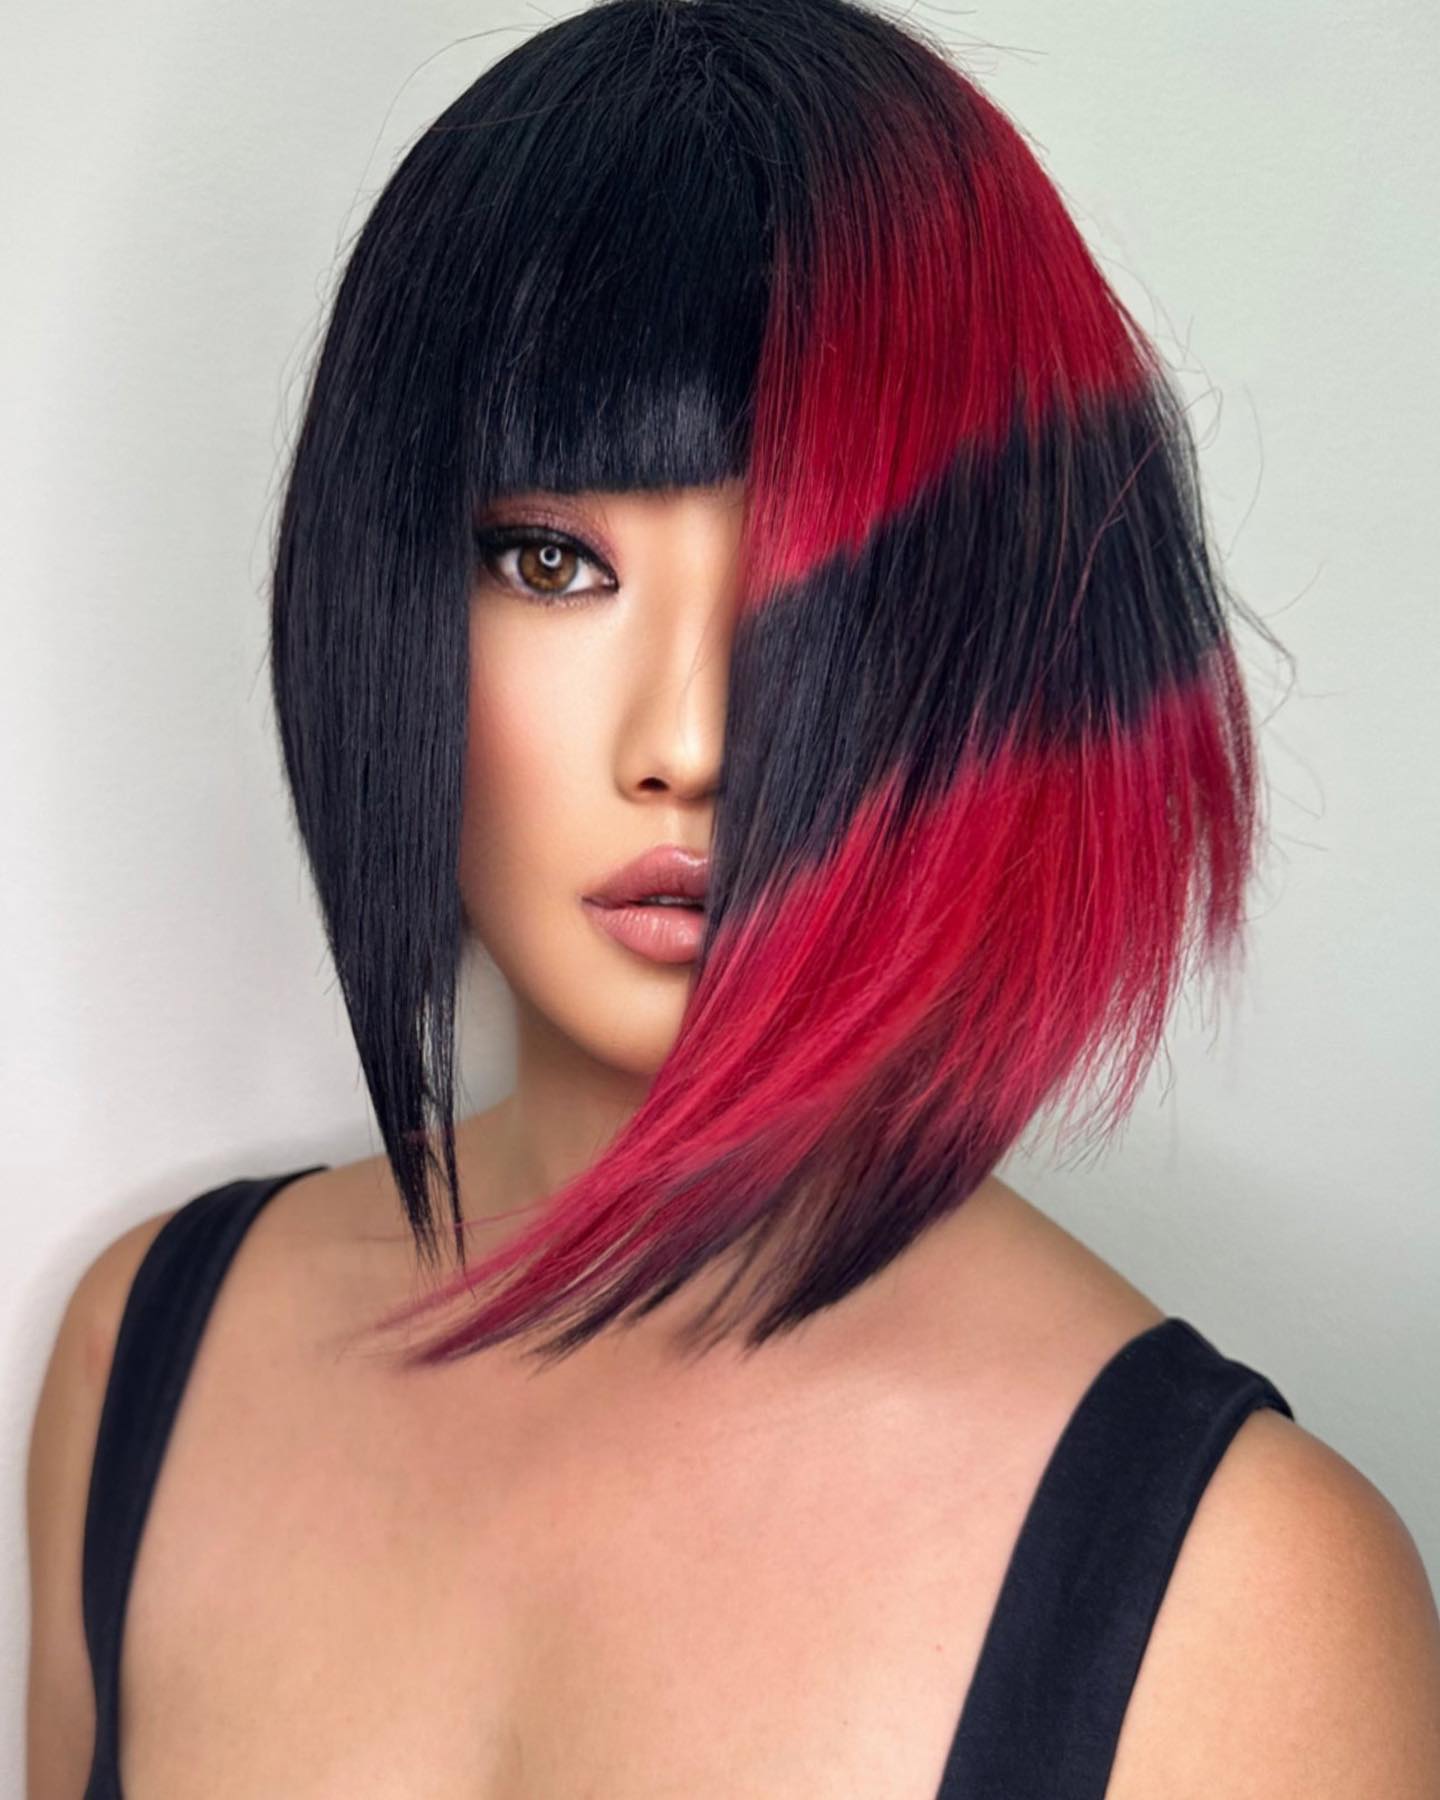 100+ Best Colorful Hair Ideas images 19